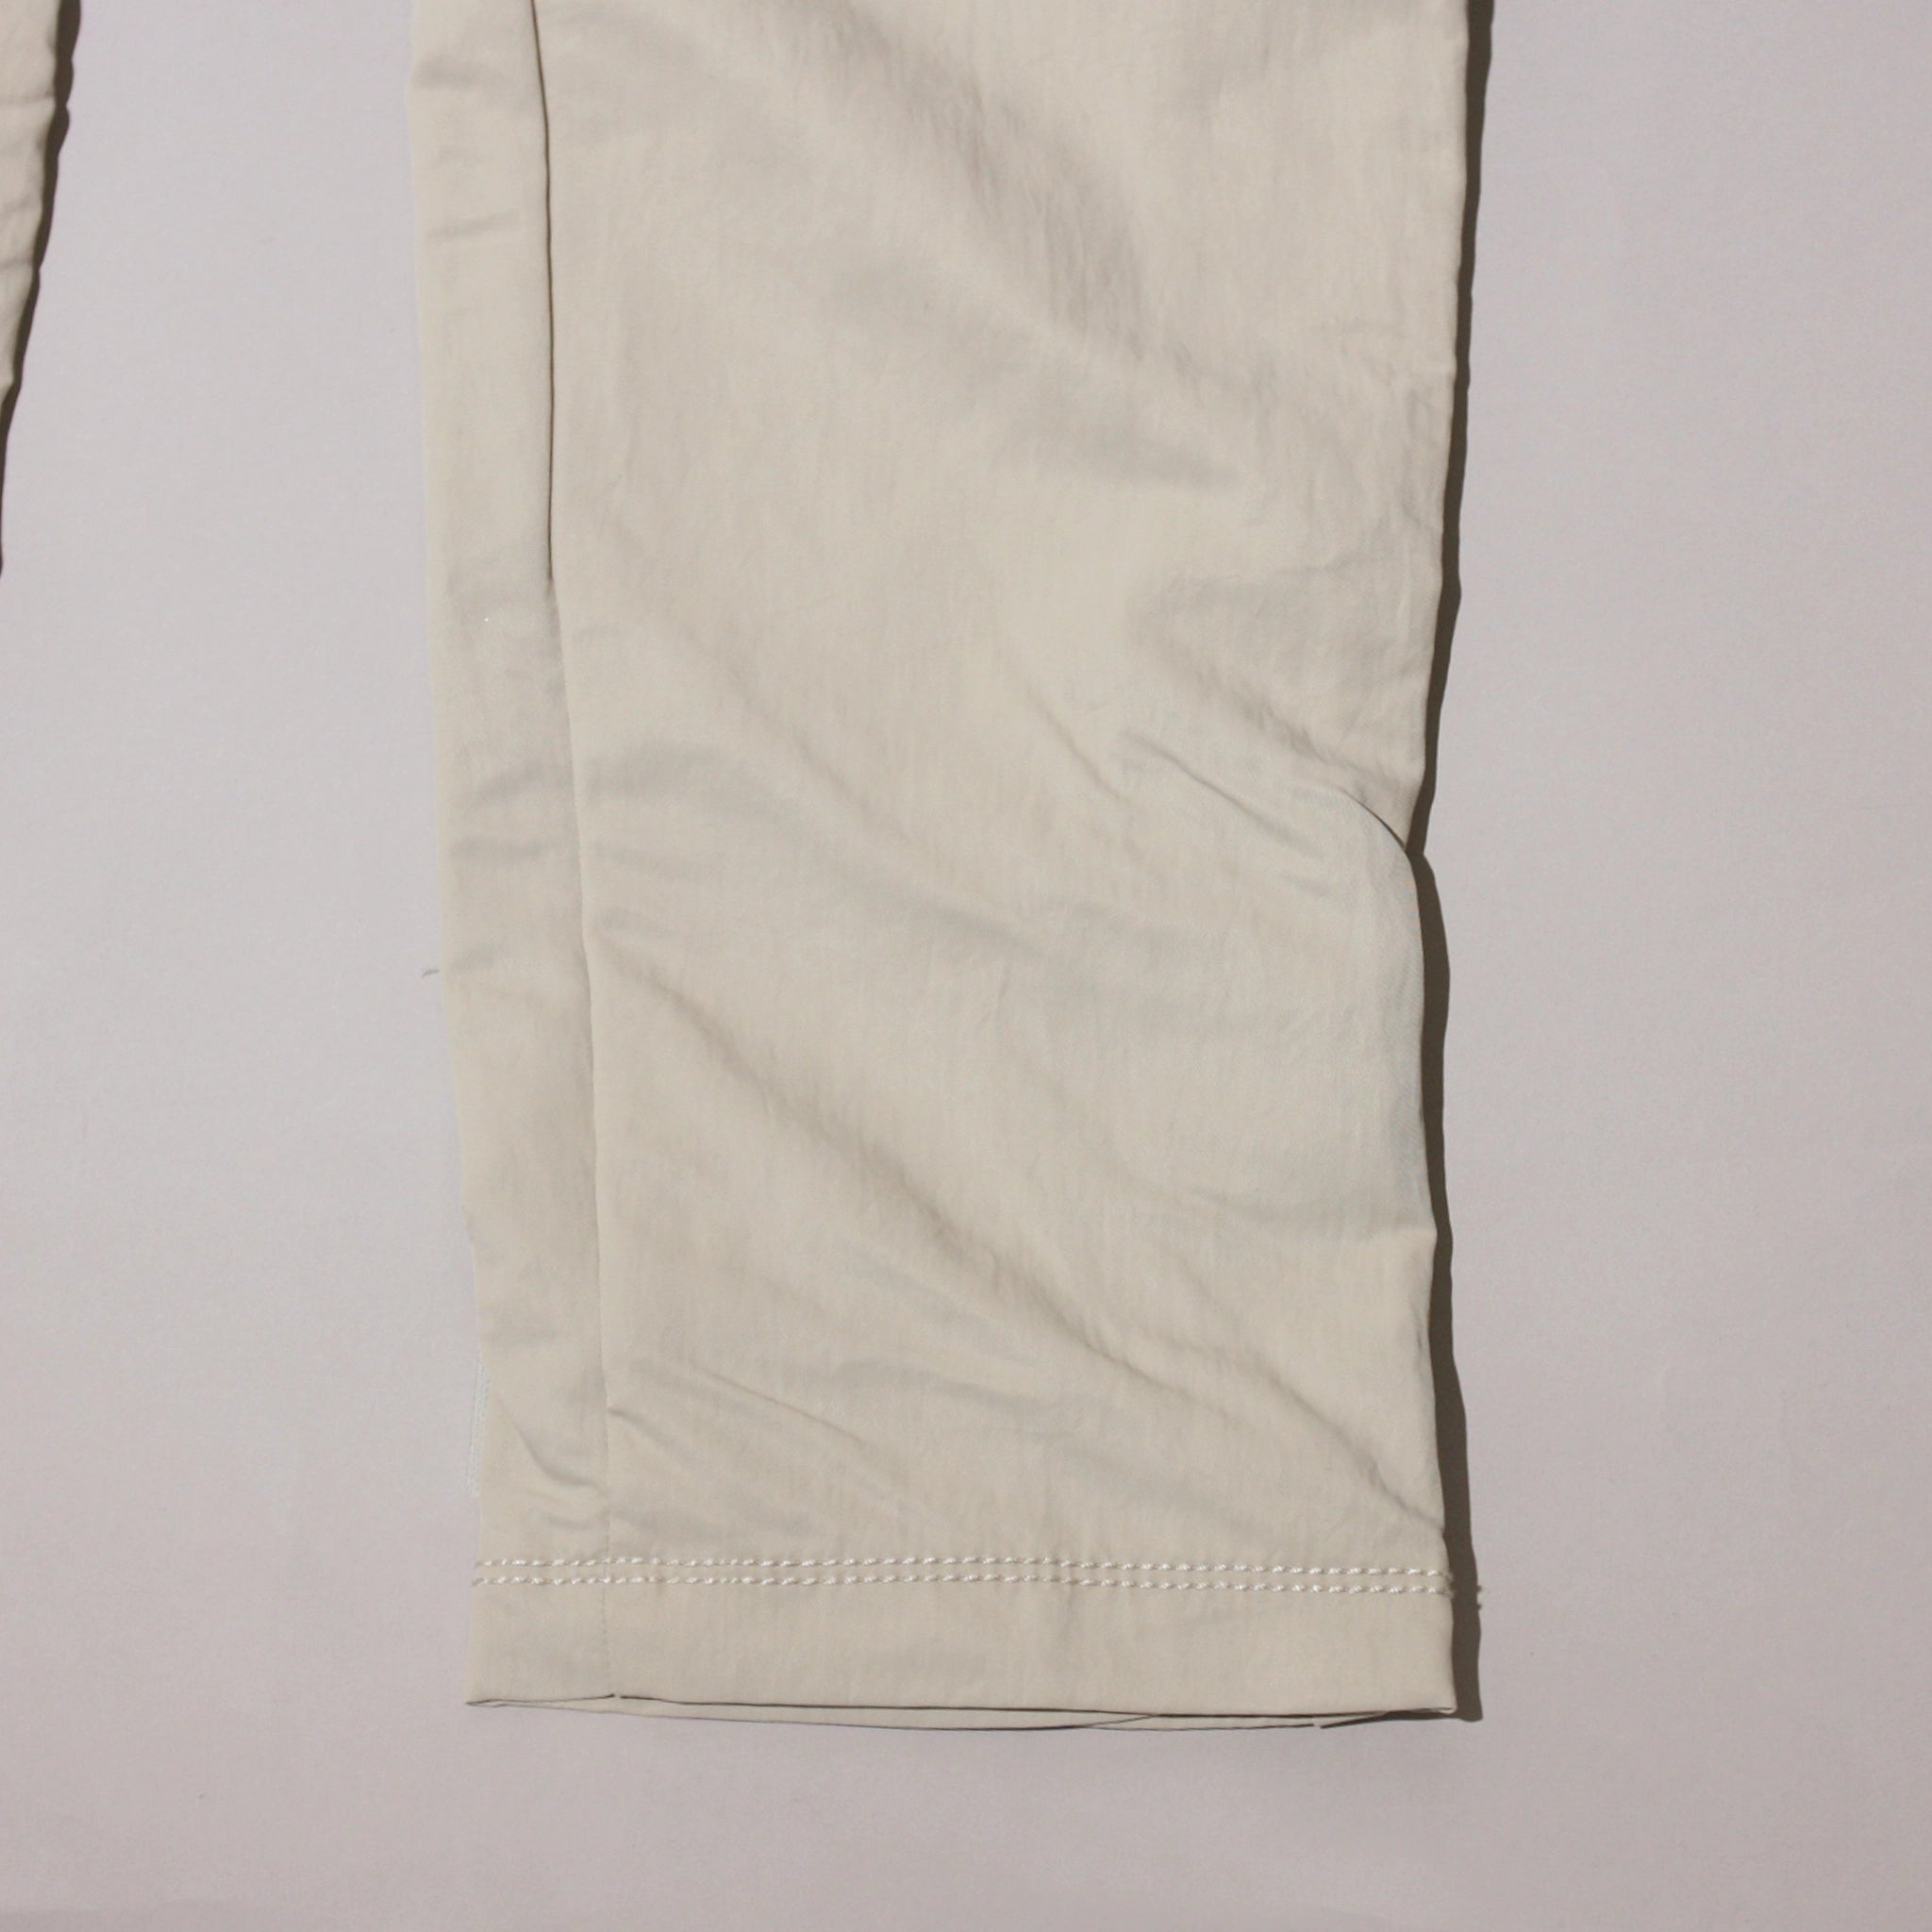 Fear of God x Nike (2020) Warmup Pants (String) Review with Fear